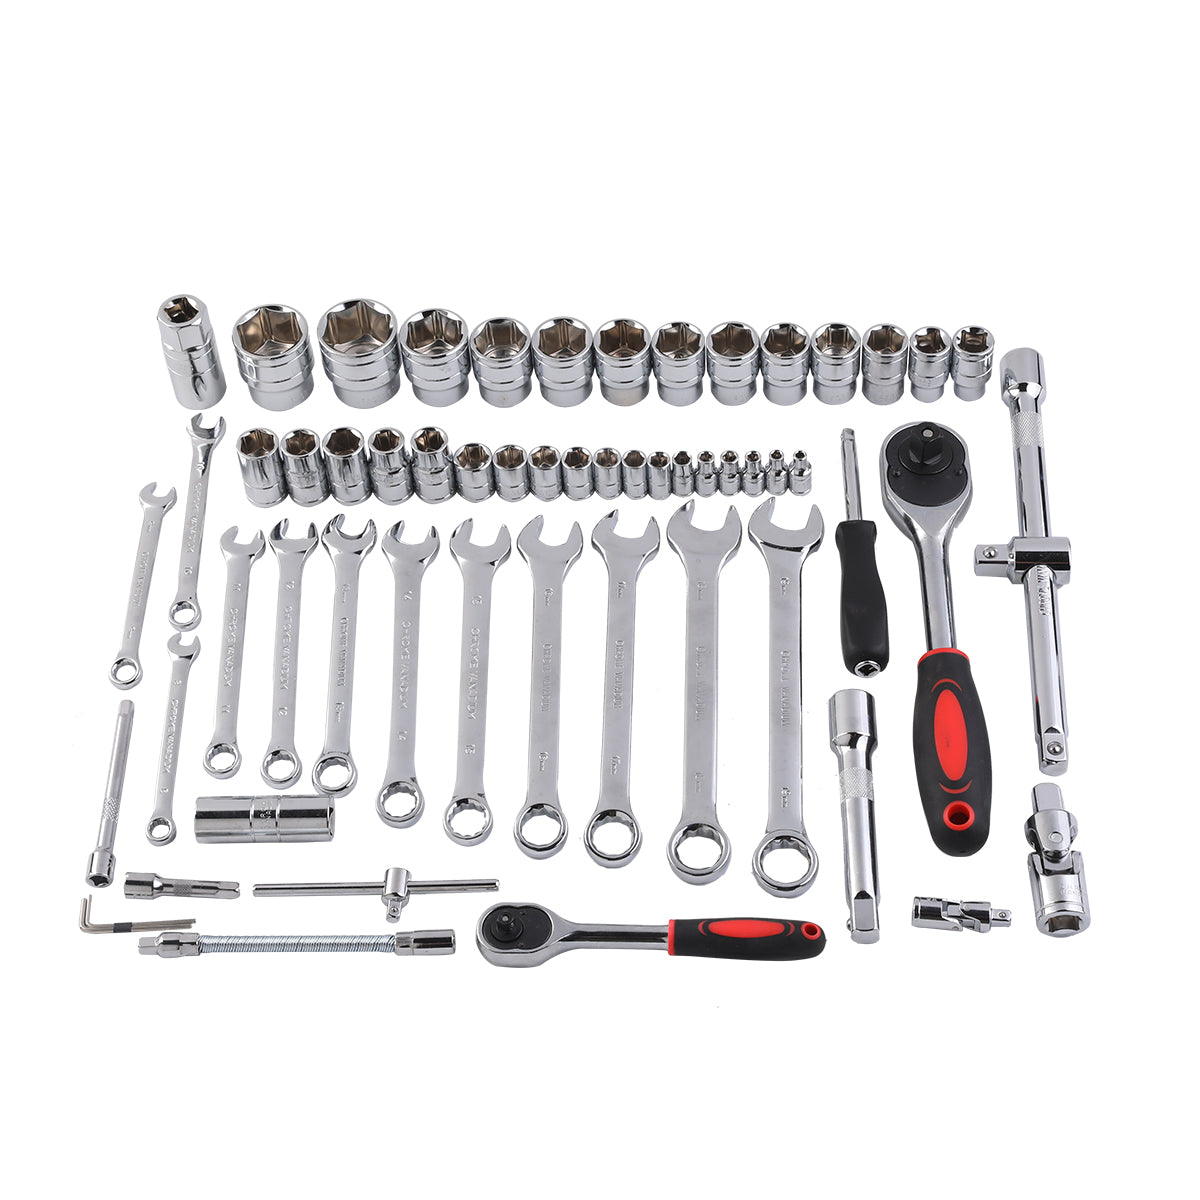 61-Piece Tools Set With Carry Case